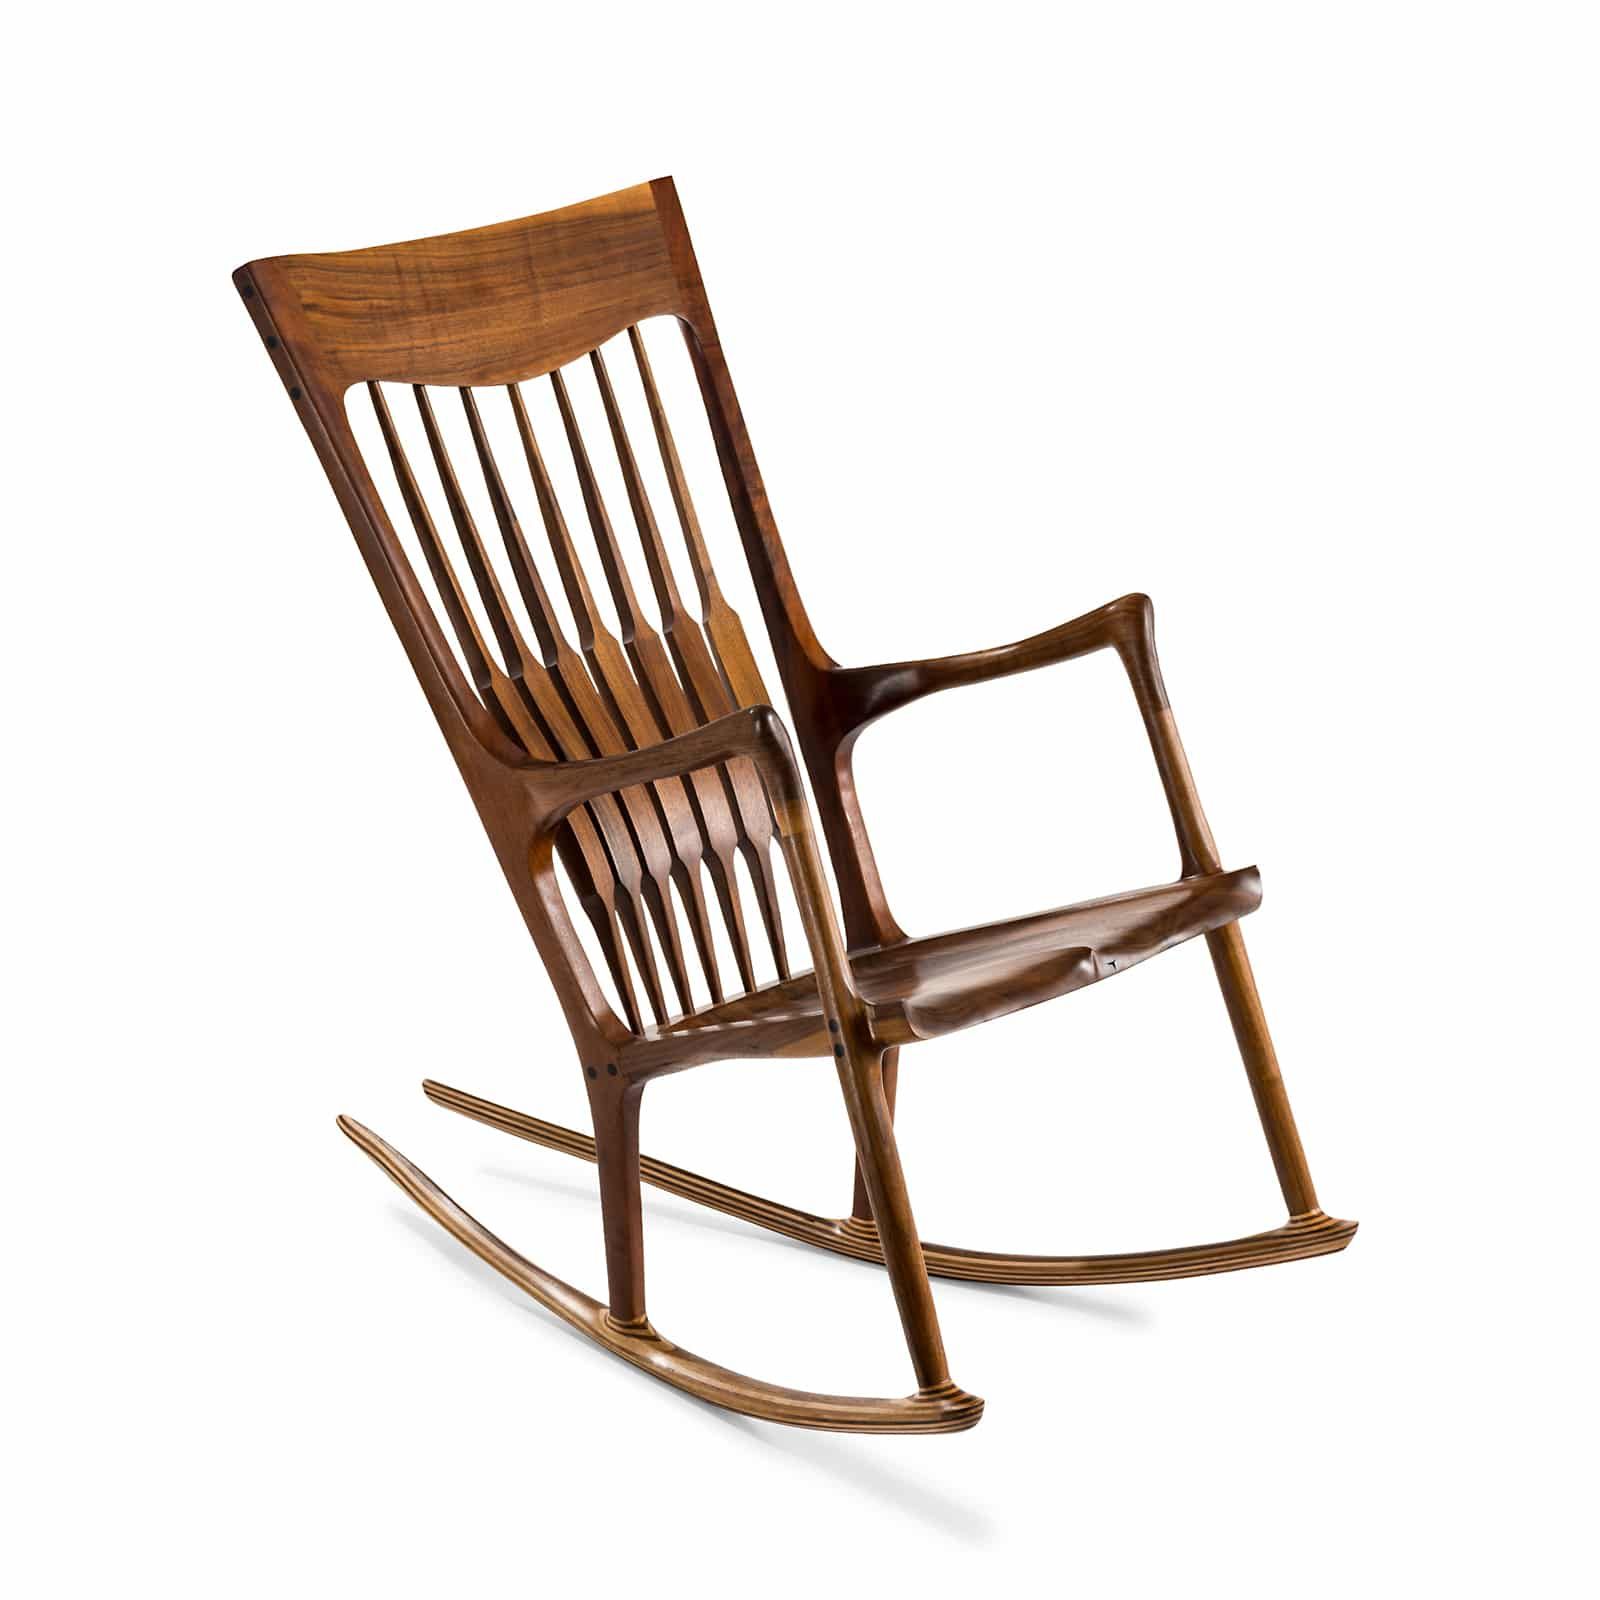 Black Walnut Rocking Chair With Ebony Details – Mebl Pertaining To Dark Walnut Brown Wooden Rocking Chairs (View 8 of 20)